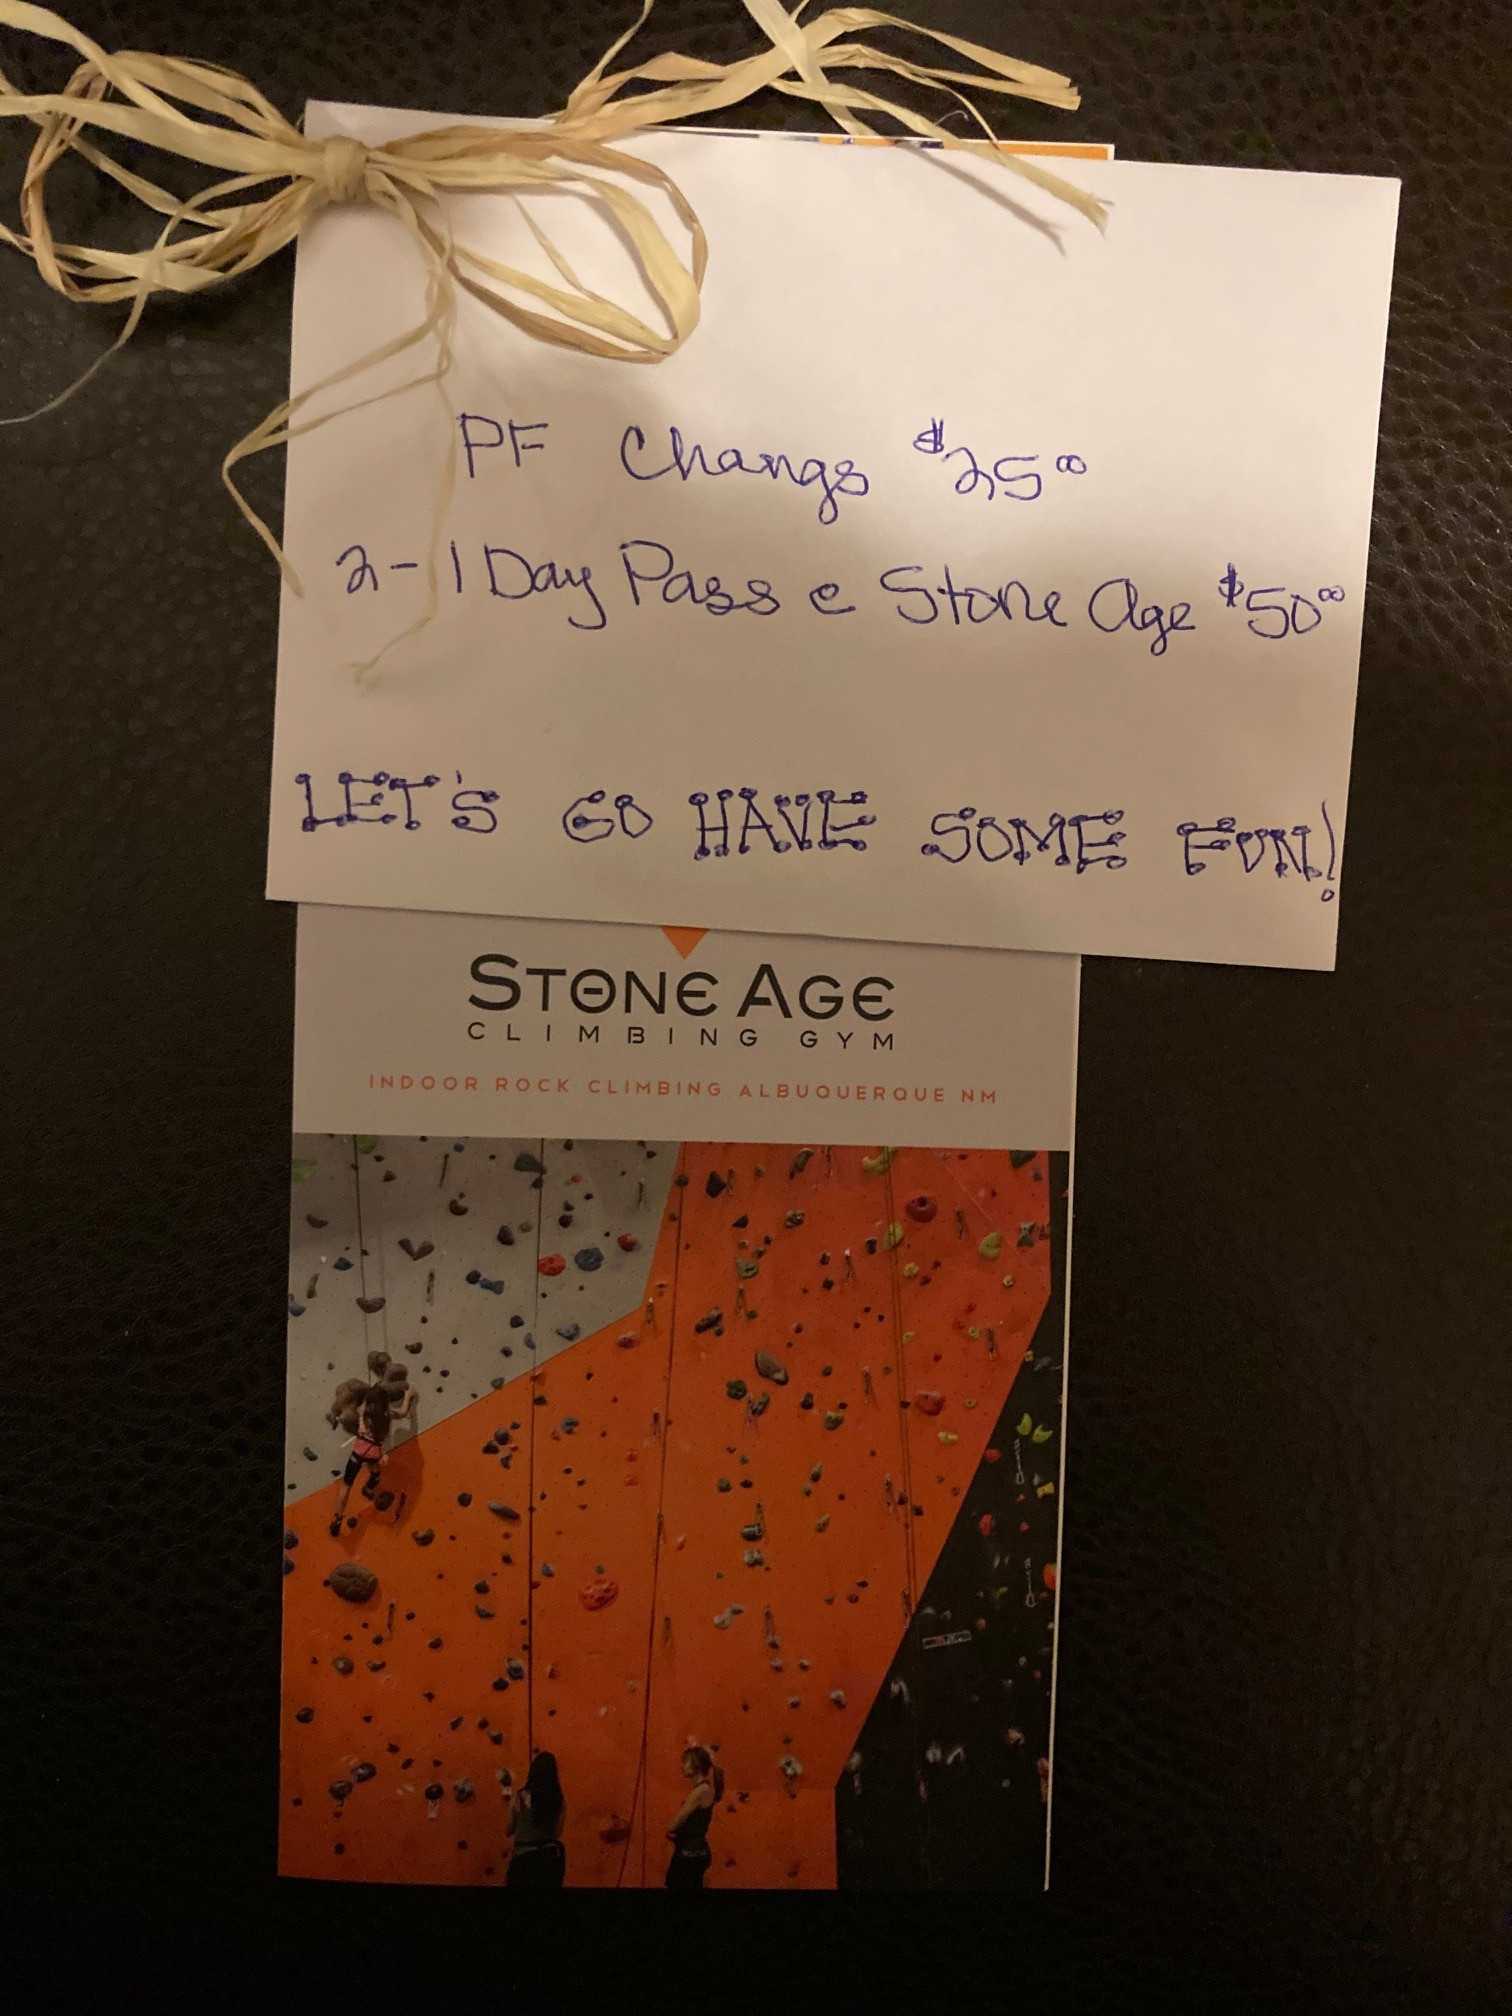 $25 to P.F. Chang's and 2 full day with rental passes to Stone Age